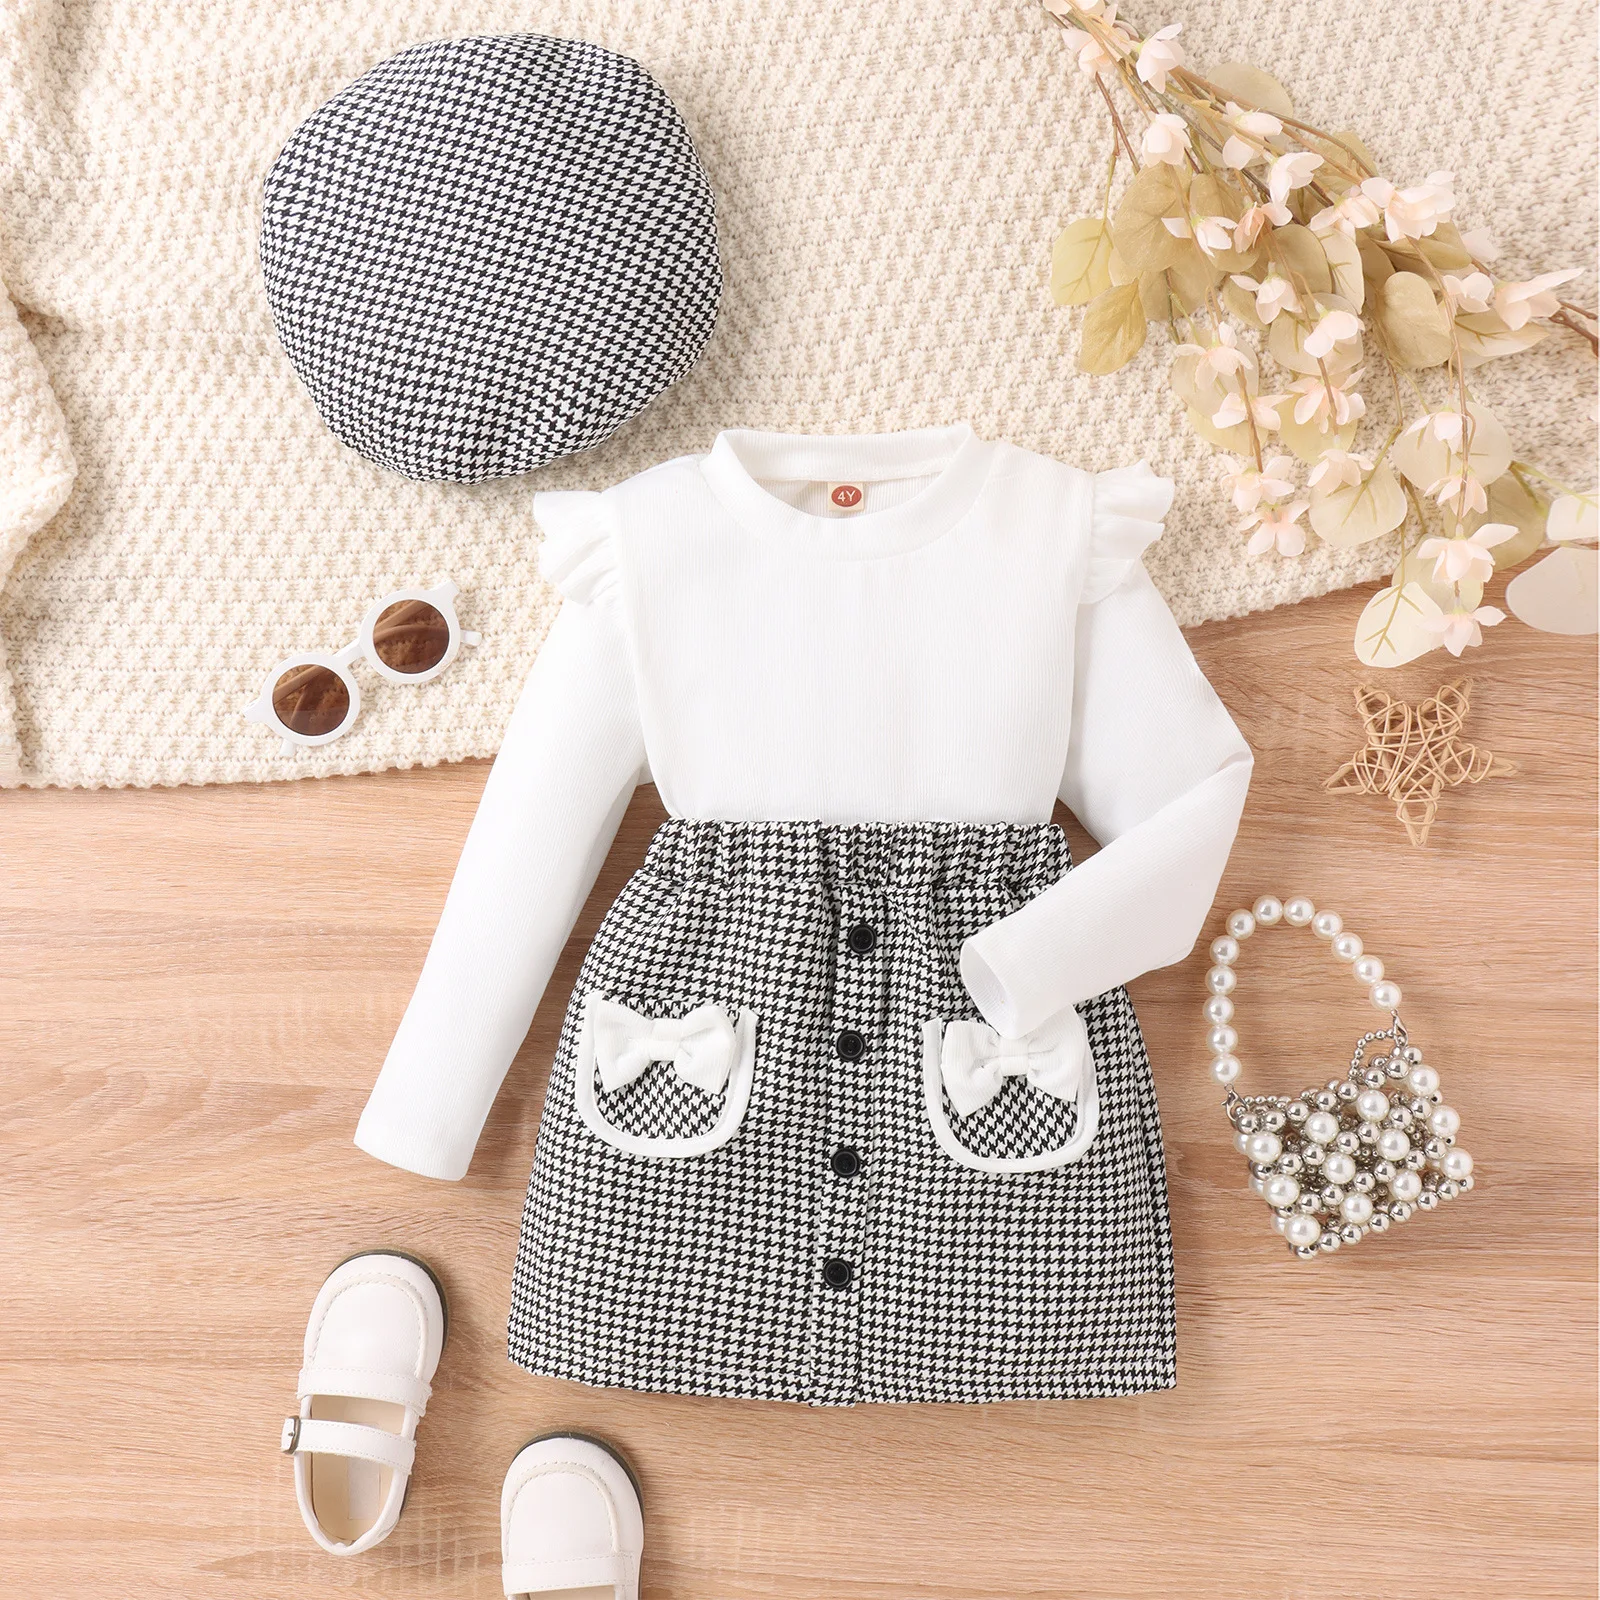 

4-7Y Girls Clothing Set Autumn Winter Solid Color Long Sleeved Top+Bird Check Bow Short Skirt+Hat 3Pcs Fashion Kids Clothes Suit